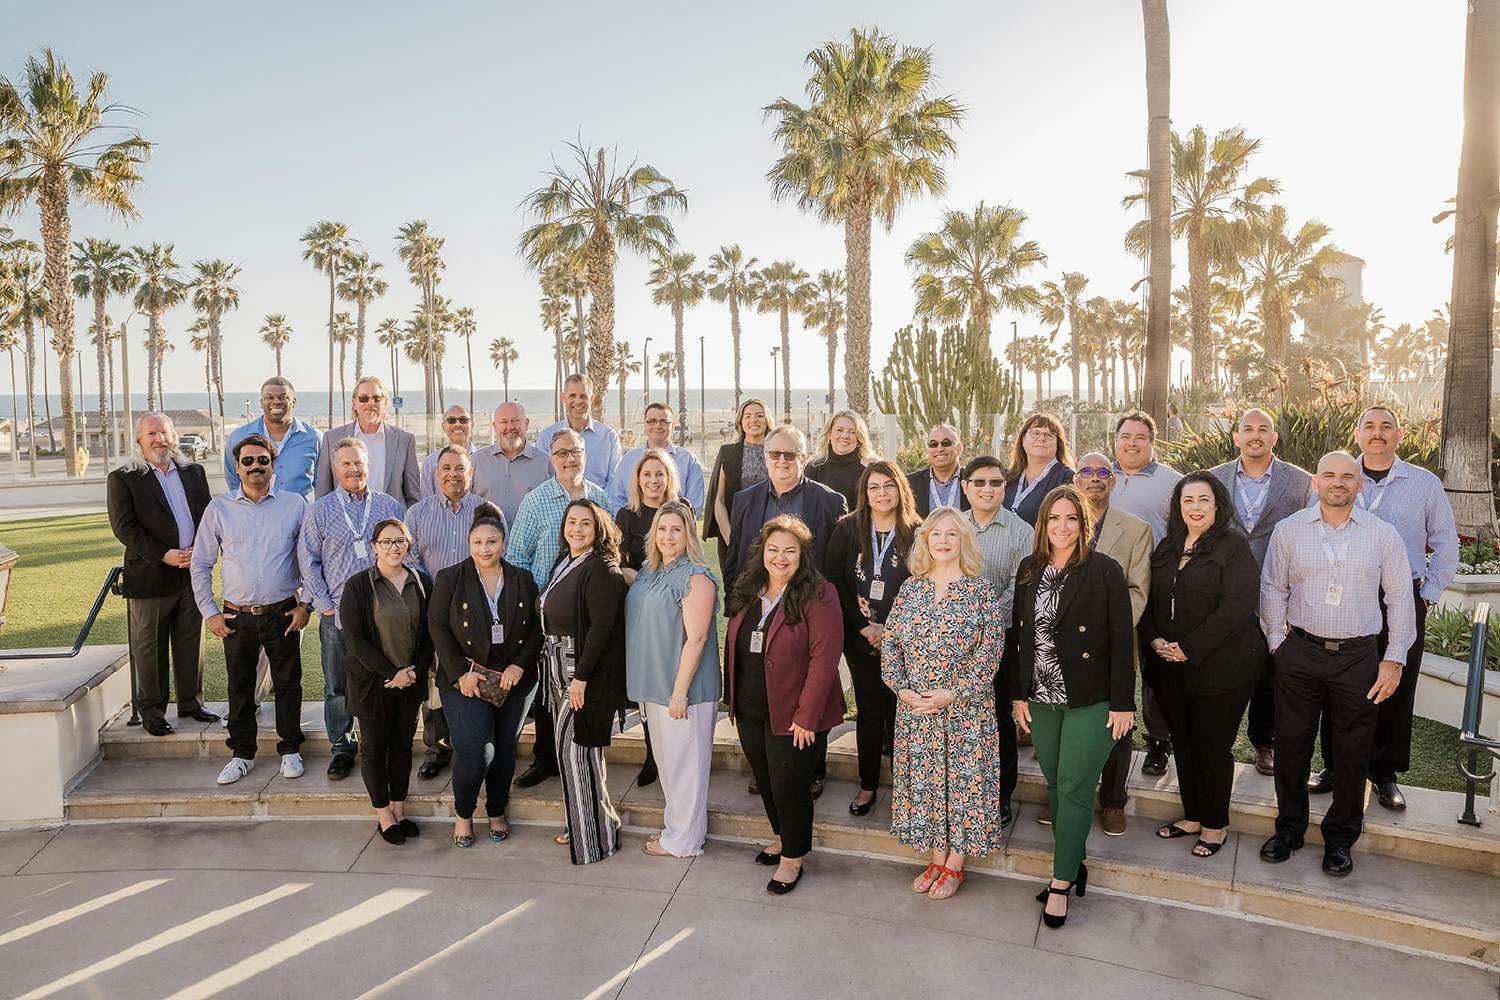 Huntington Beach, CA: With no physical offices, we meet throughout the year to build connections and have fun. 